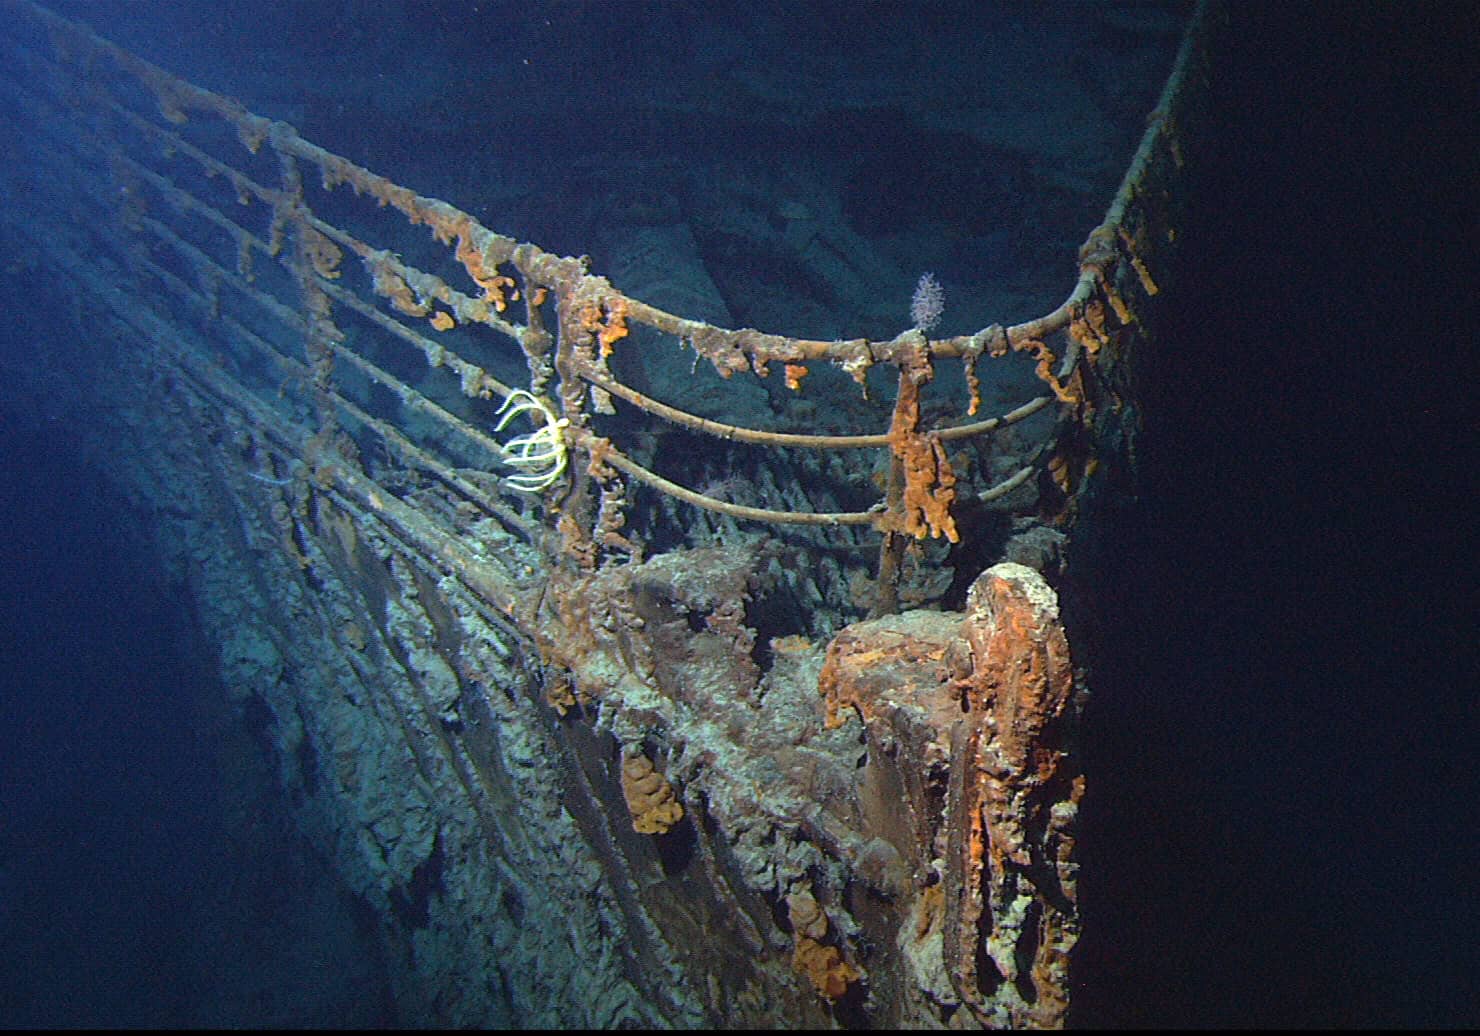 <p>One of the best-known pictures of the <a href="https://oceantoday.noaa.gov/titanicwrecksite/">Titanic wreckage</a> is that of its bow. For many people, this is also the location where a memorable fictional moment occurred in the <em>James Cameron</em> movie. Unfortunately, it’s also a stark look at the shape of the wreckage today. </p><p><span>Would you please let us know what you think about our content? <p>Agree? Tell us by clicking the “Thumbs Up” button above.</p> Disagree? Leave a comment telling us what you’d change.</span></p>